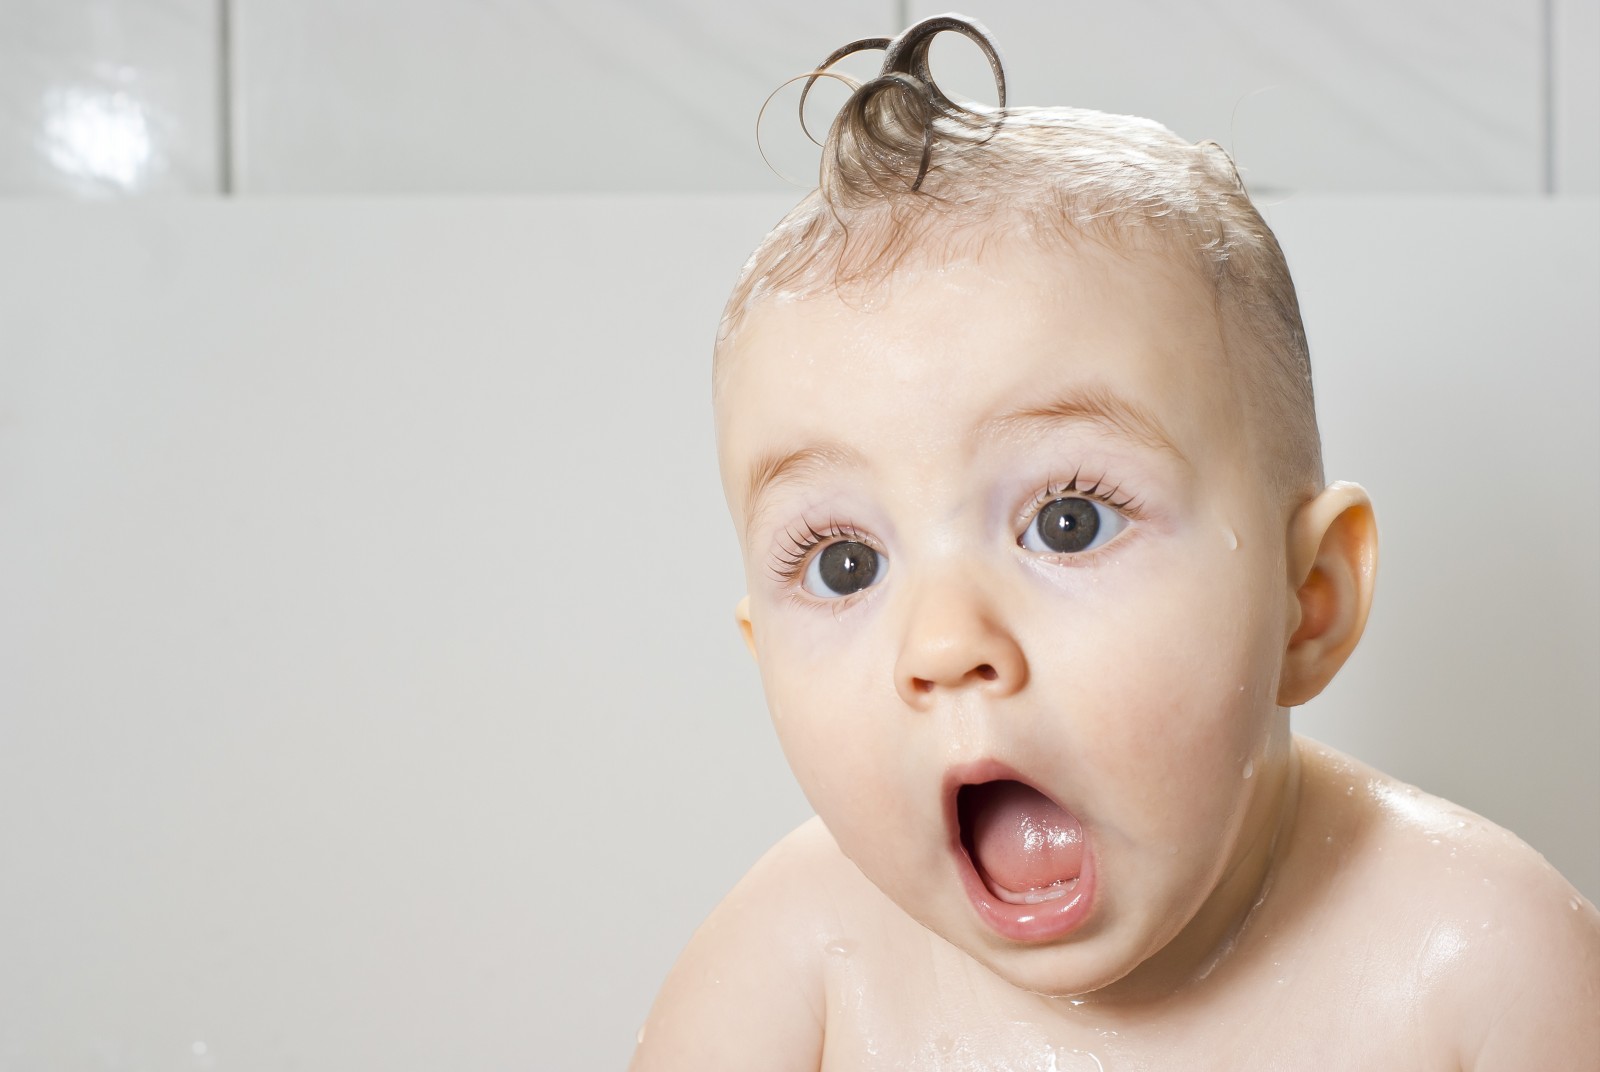 Funny And Cute Baby At The Same Time Baby Wallpapers